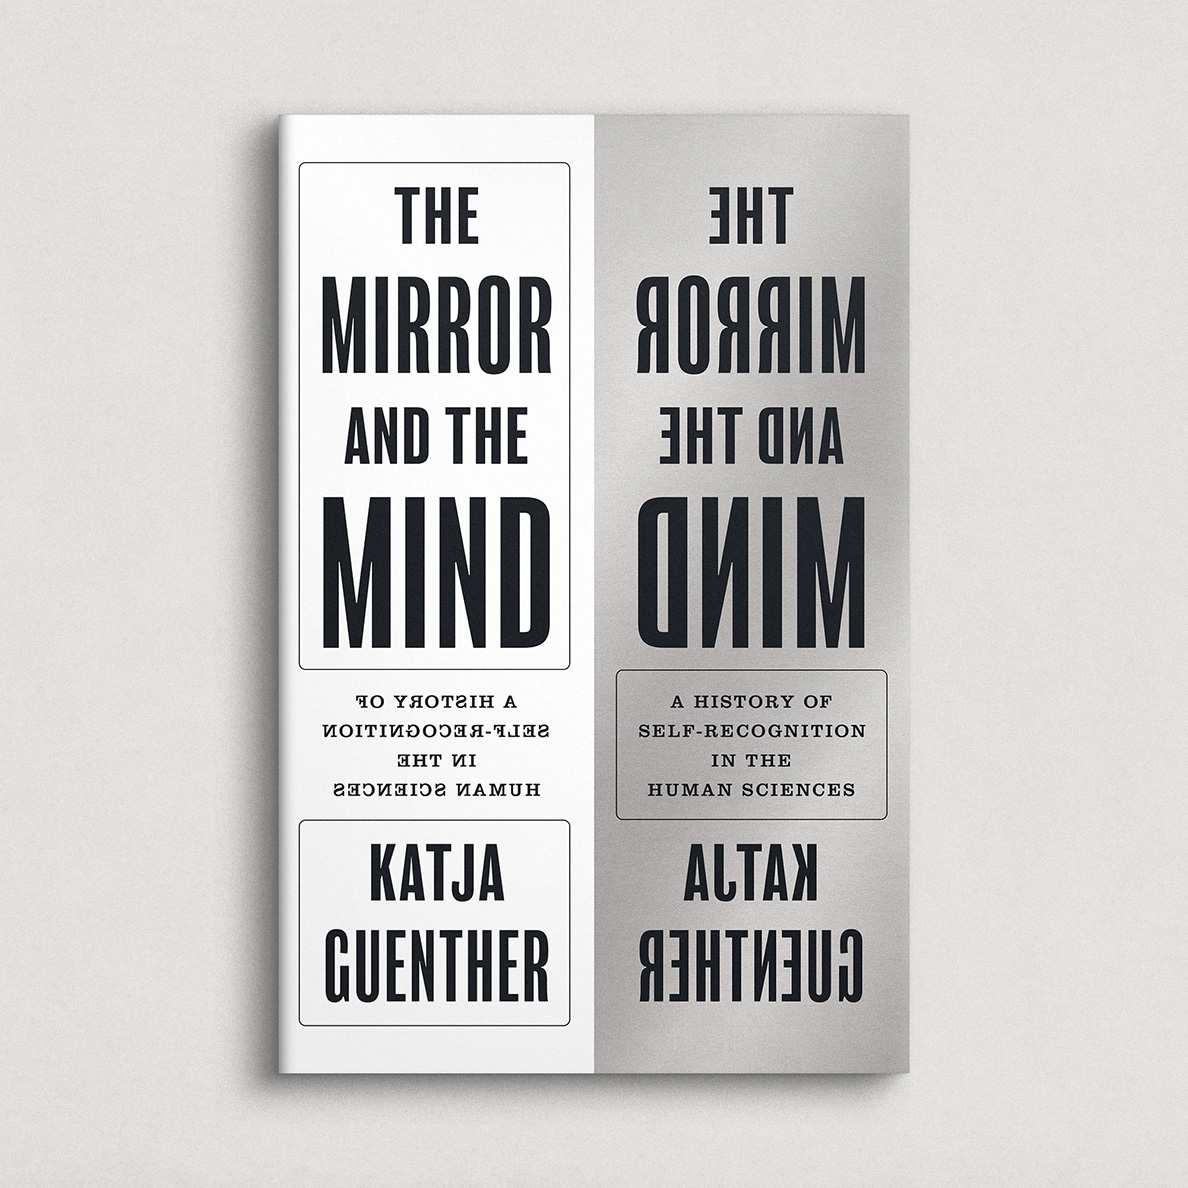 The Mirror and the Mind book cover